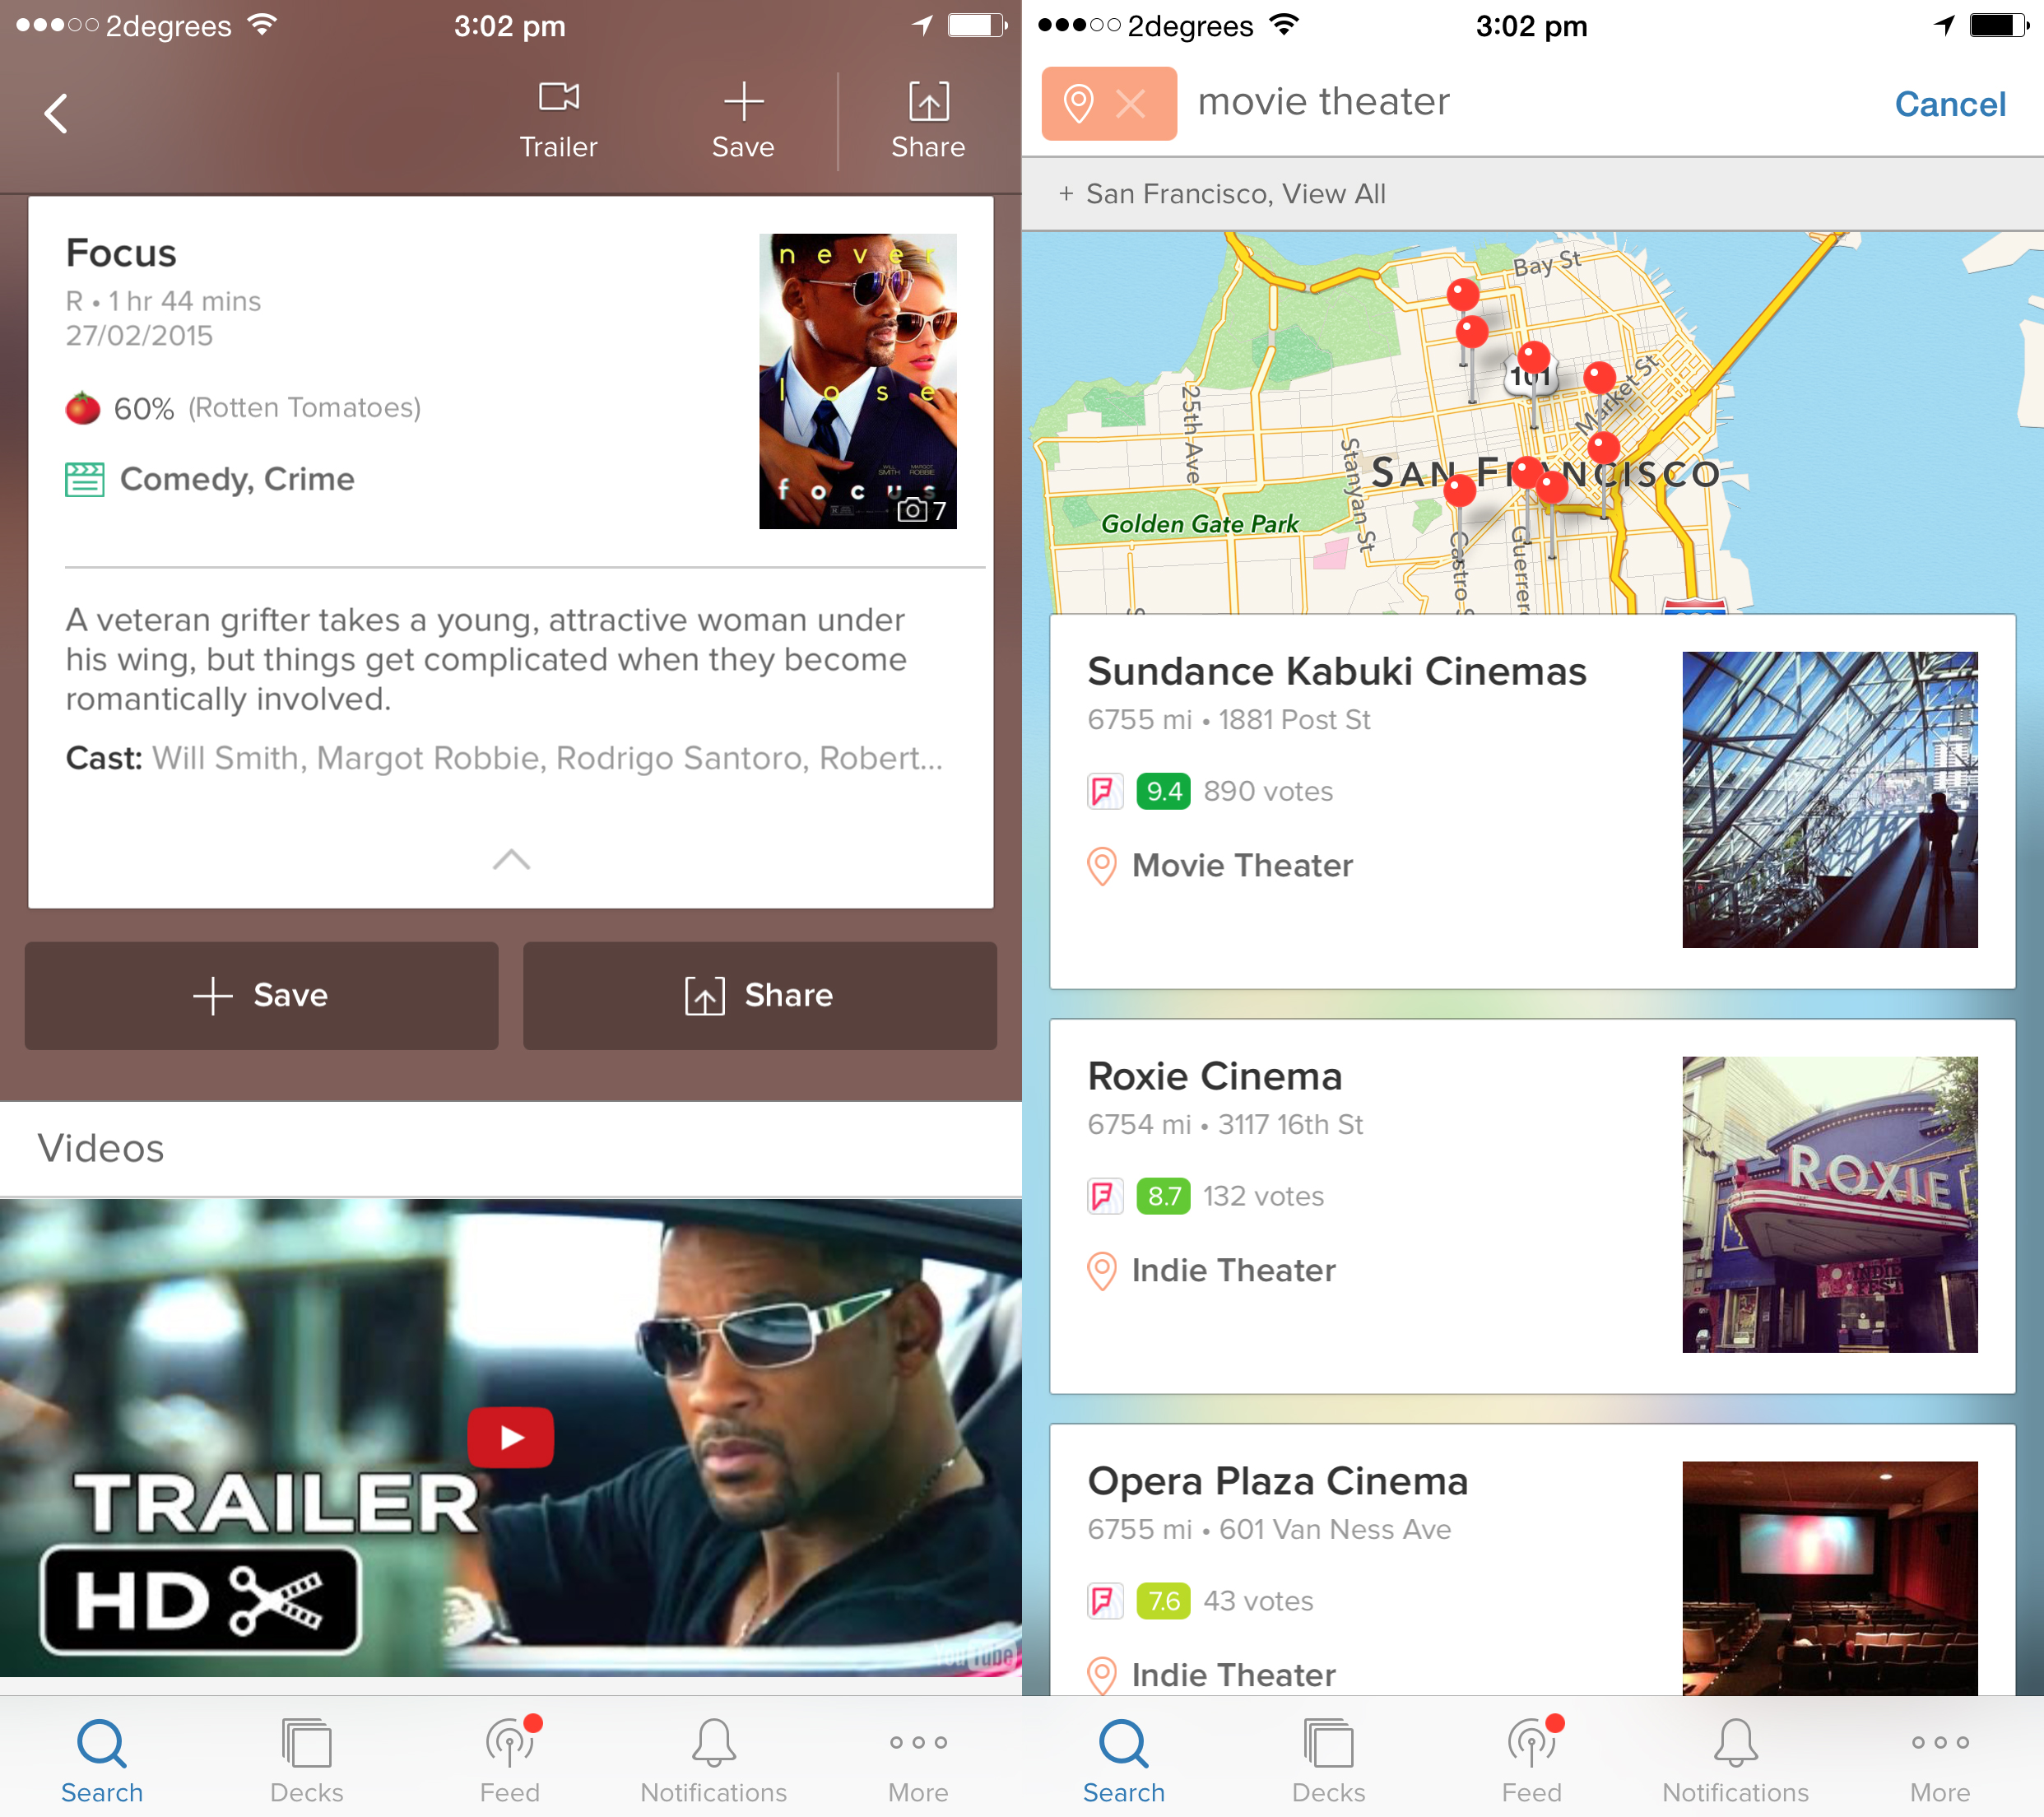 vurb 1 Vurb is a mobile search engine that helps you get things done without jumping between apps